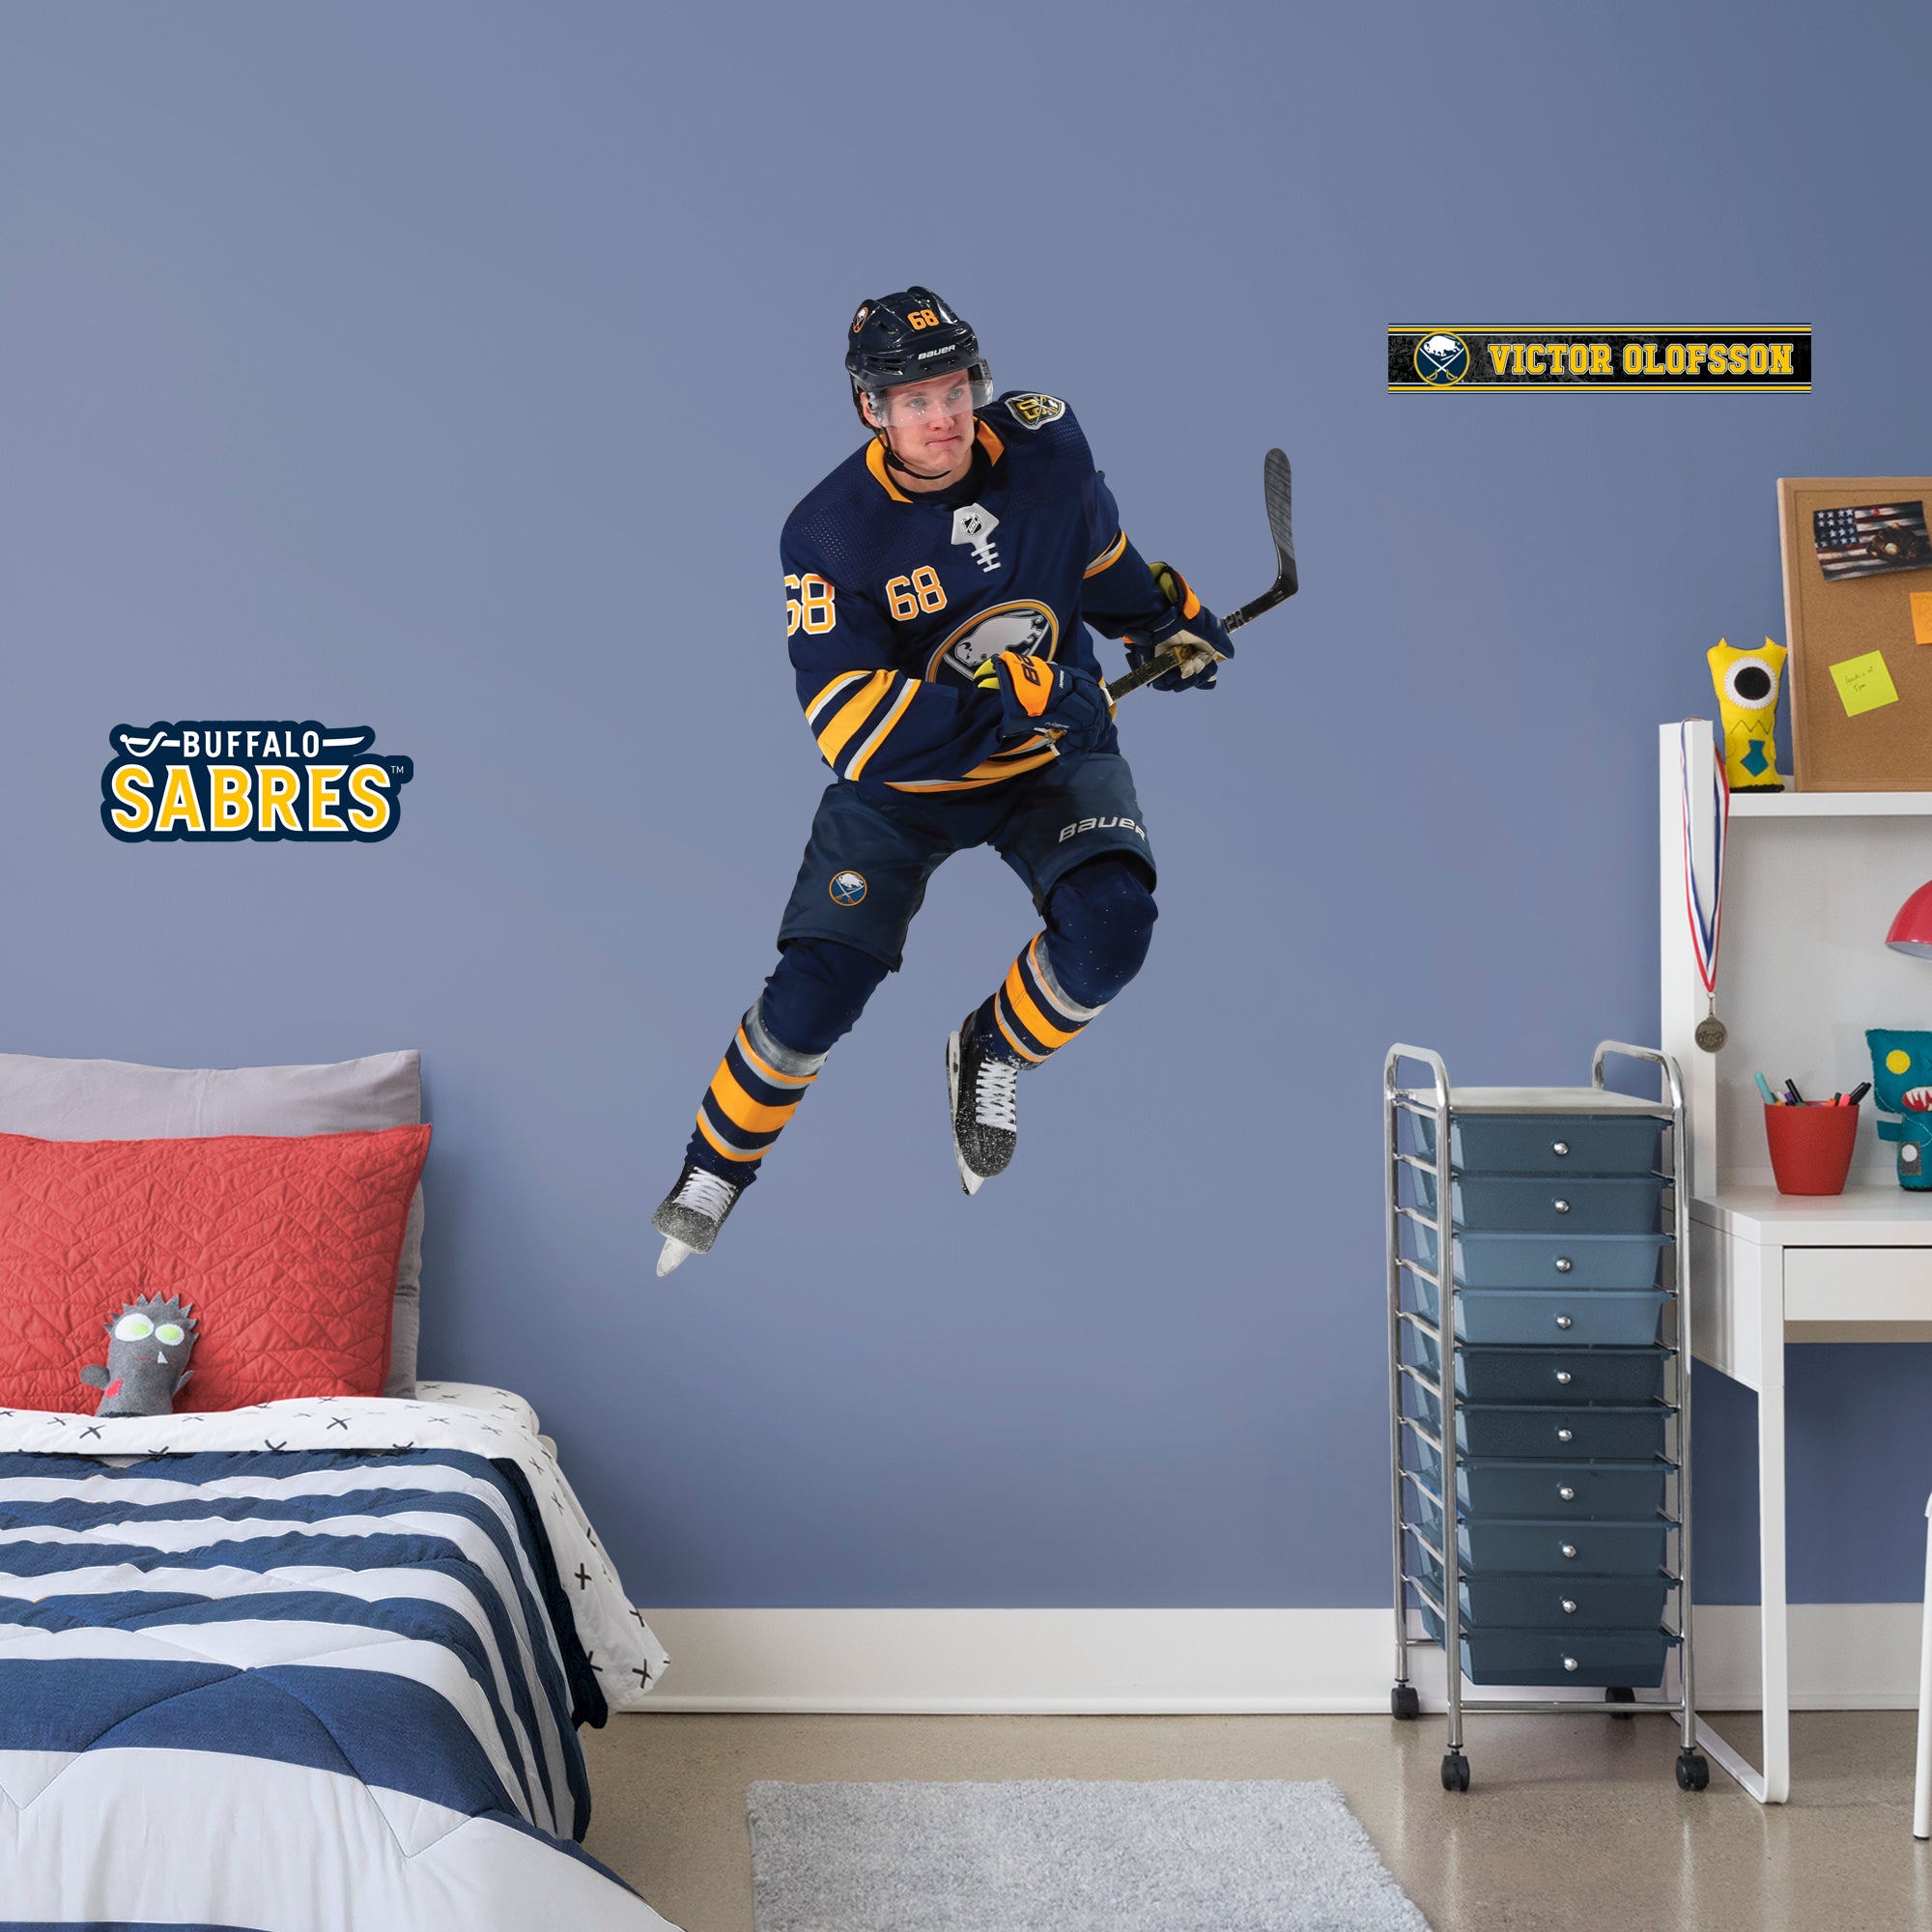 Victor Olofsson for Buffalo Sabres: RealBig Officially Licensed NHL Removable Wall Decal Giant Athlete + 2 Decals (33"W x 51"H)